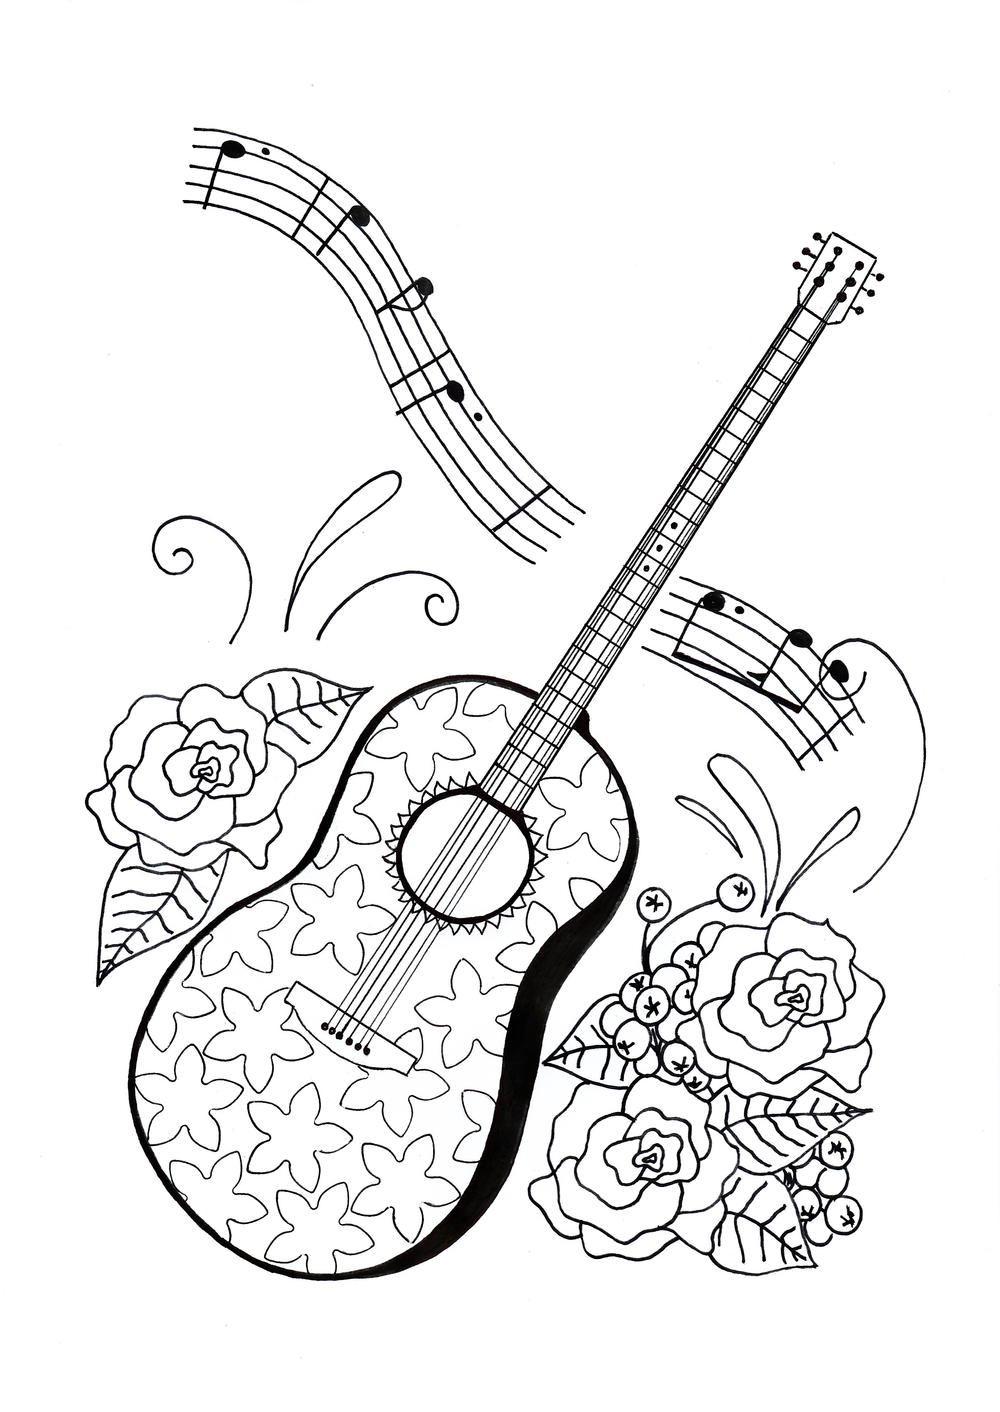 For the Love of Music Adult Coloring Page | FaveCrafts.com